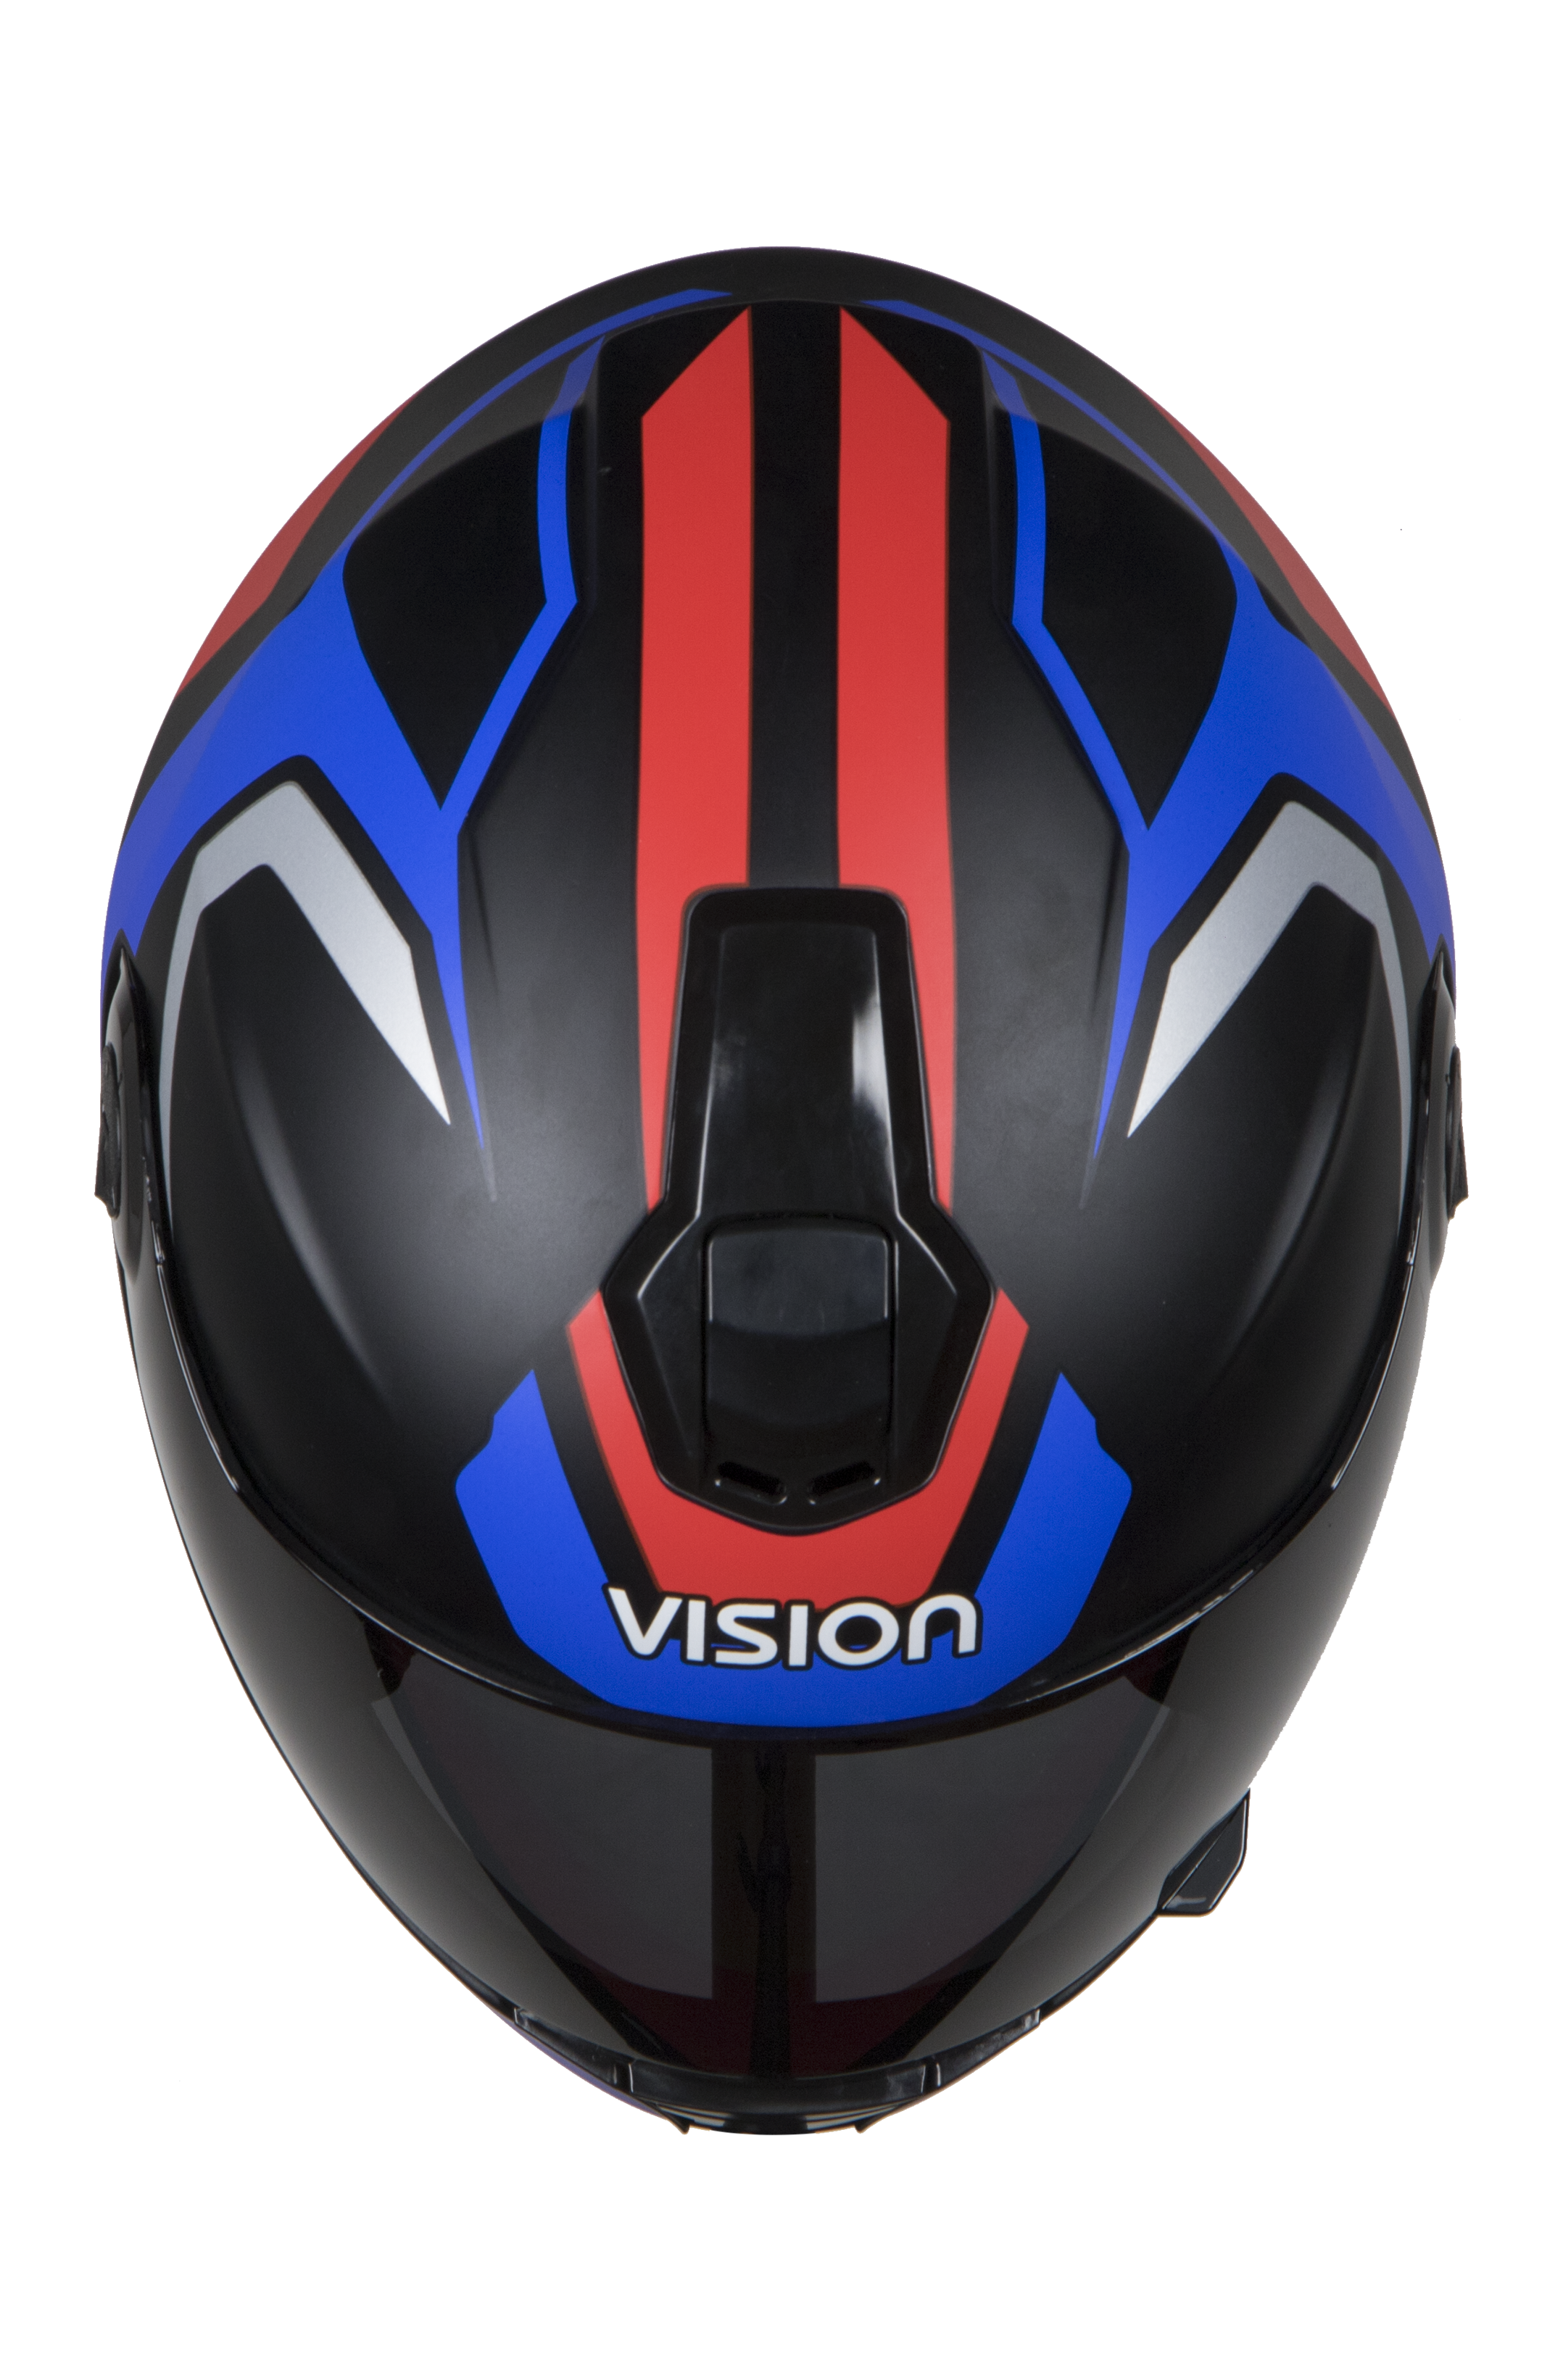 SBH-11 Alpha Beta Mat Blue Red( Fitted With Clear Visor Extra Smoke Visor Free)